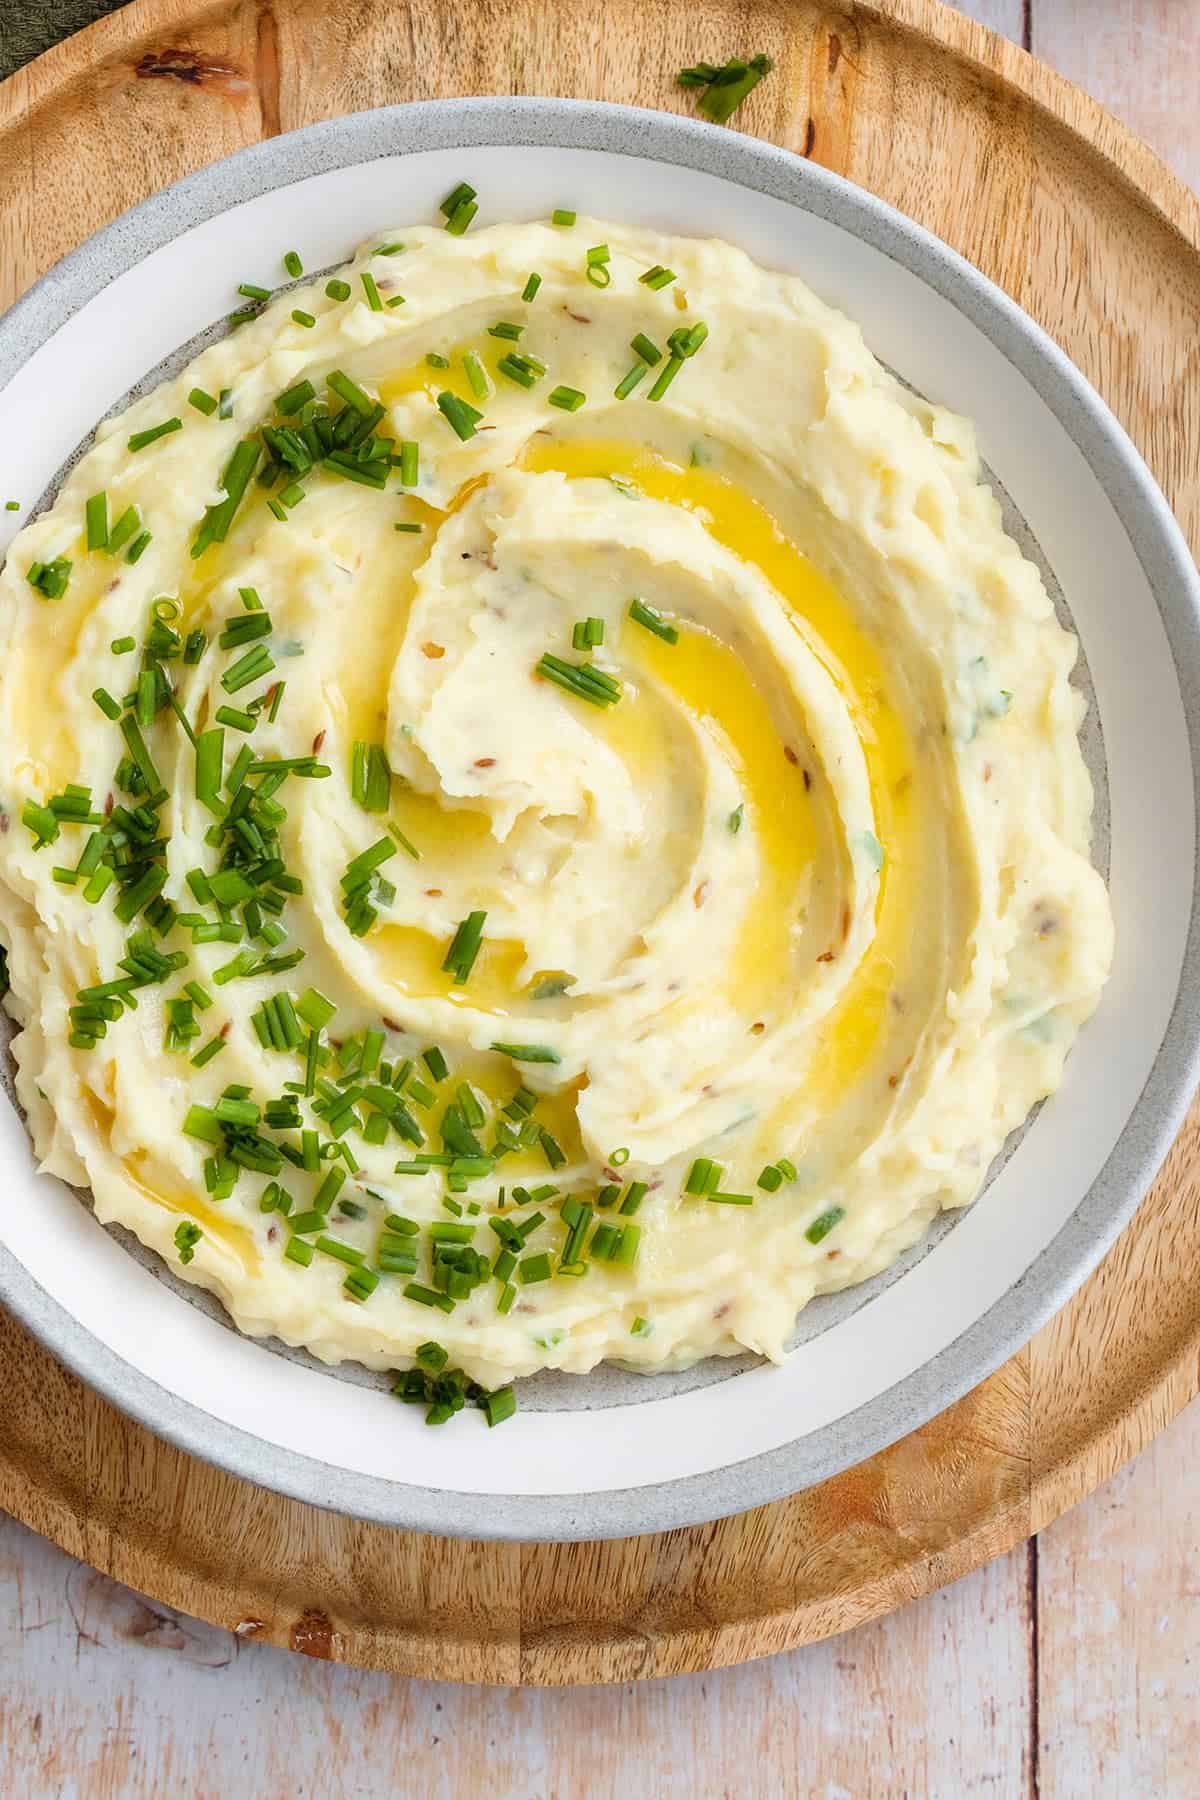 Creamy, buttery mashed potatoes with chives in a bowl.